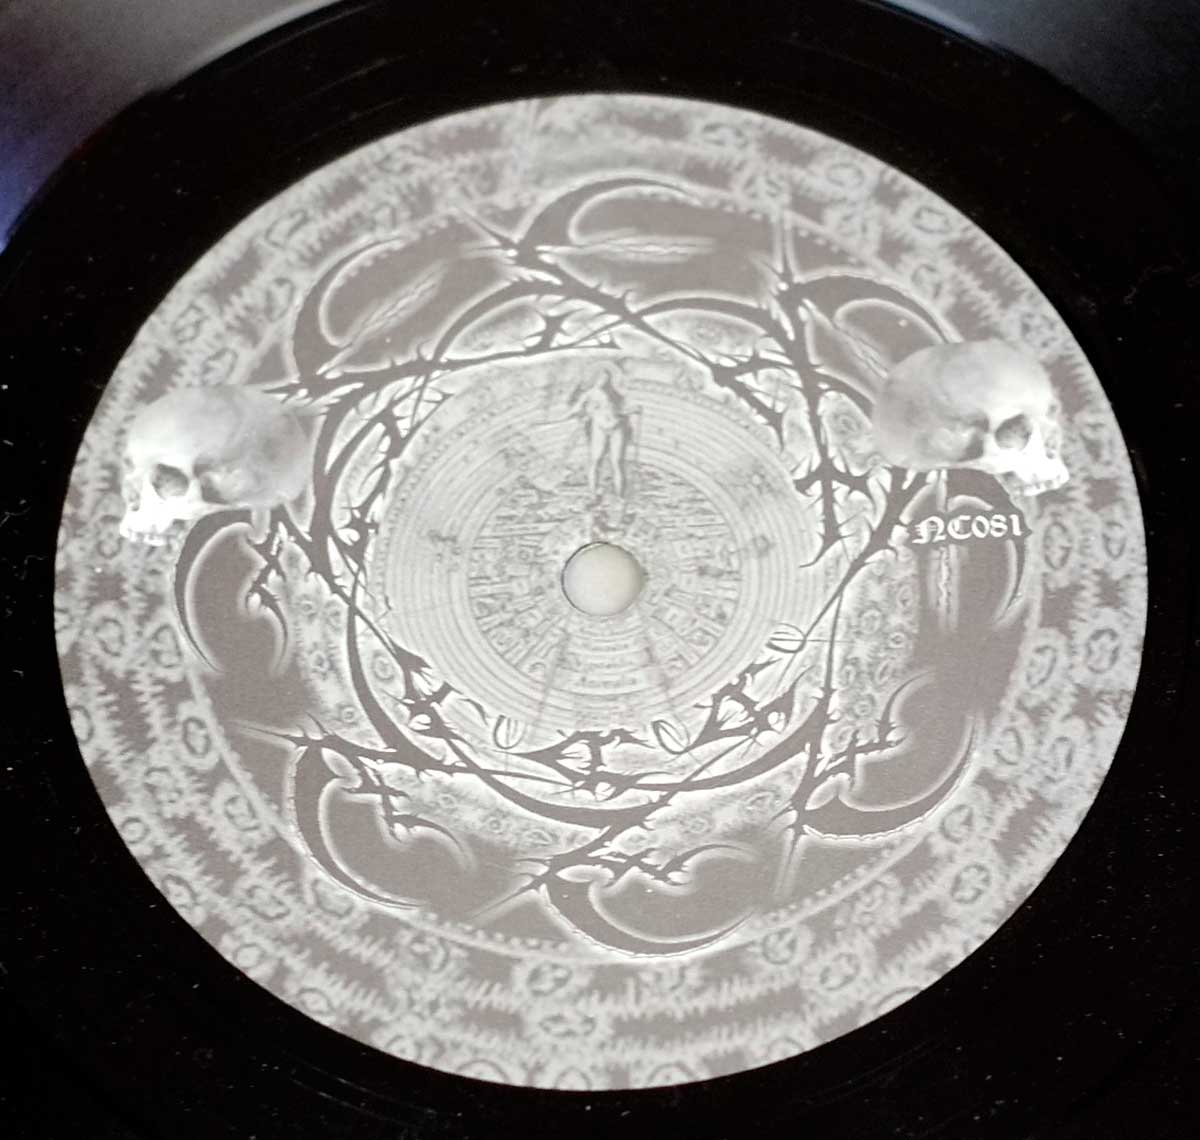 Close-up on the Illustration on the record label  